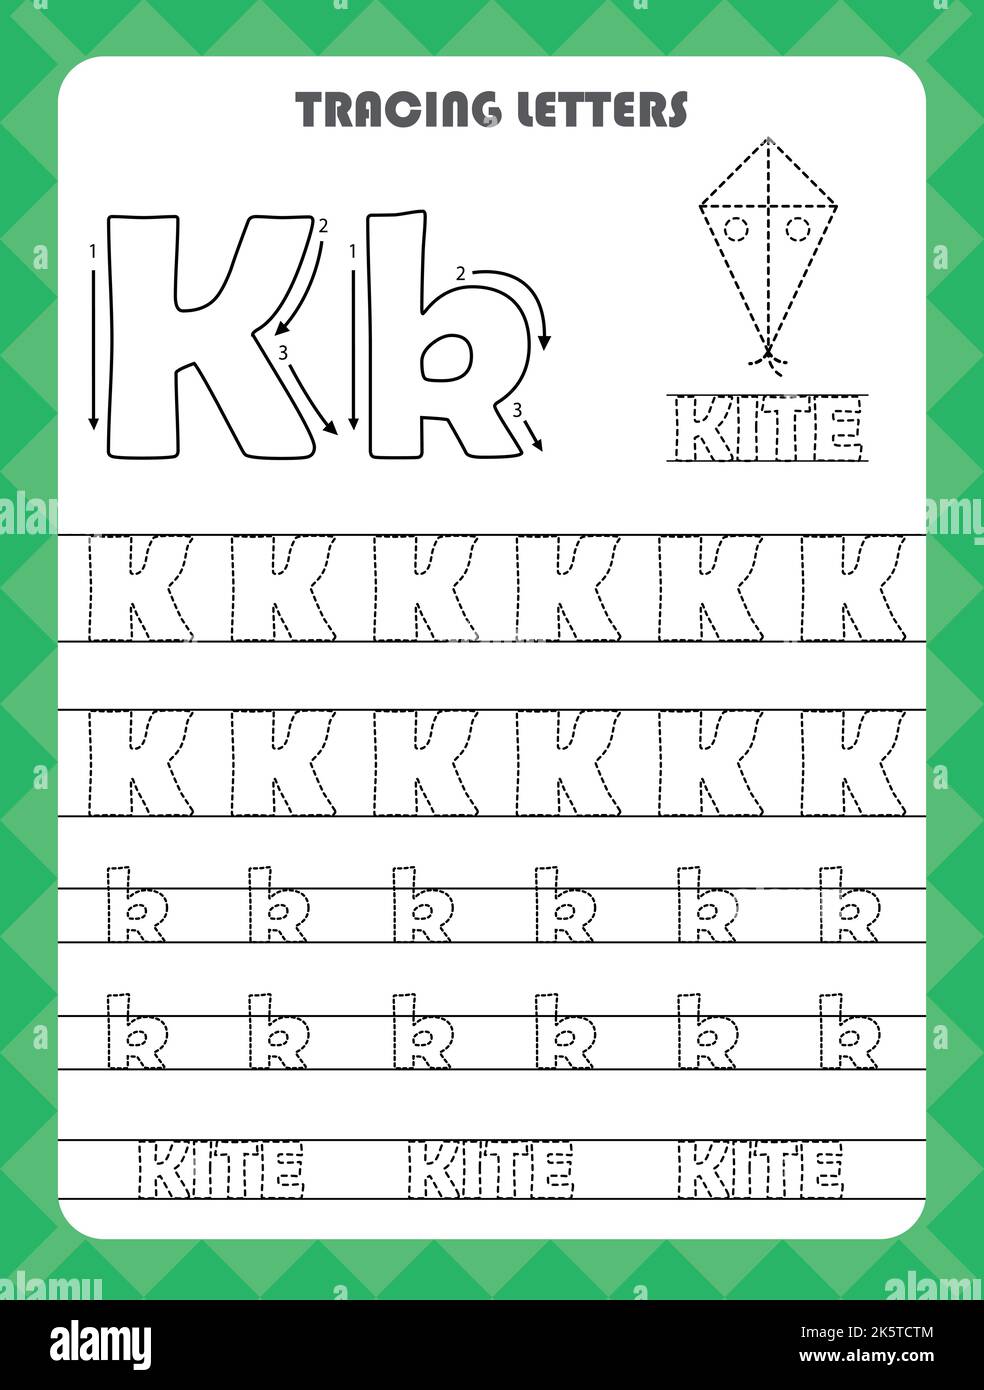 Trace letters of English alphabet and fill colors Uppercase and lowercase K. Handwriting practice for preschool kids worksheet. Stock Vector